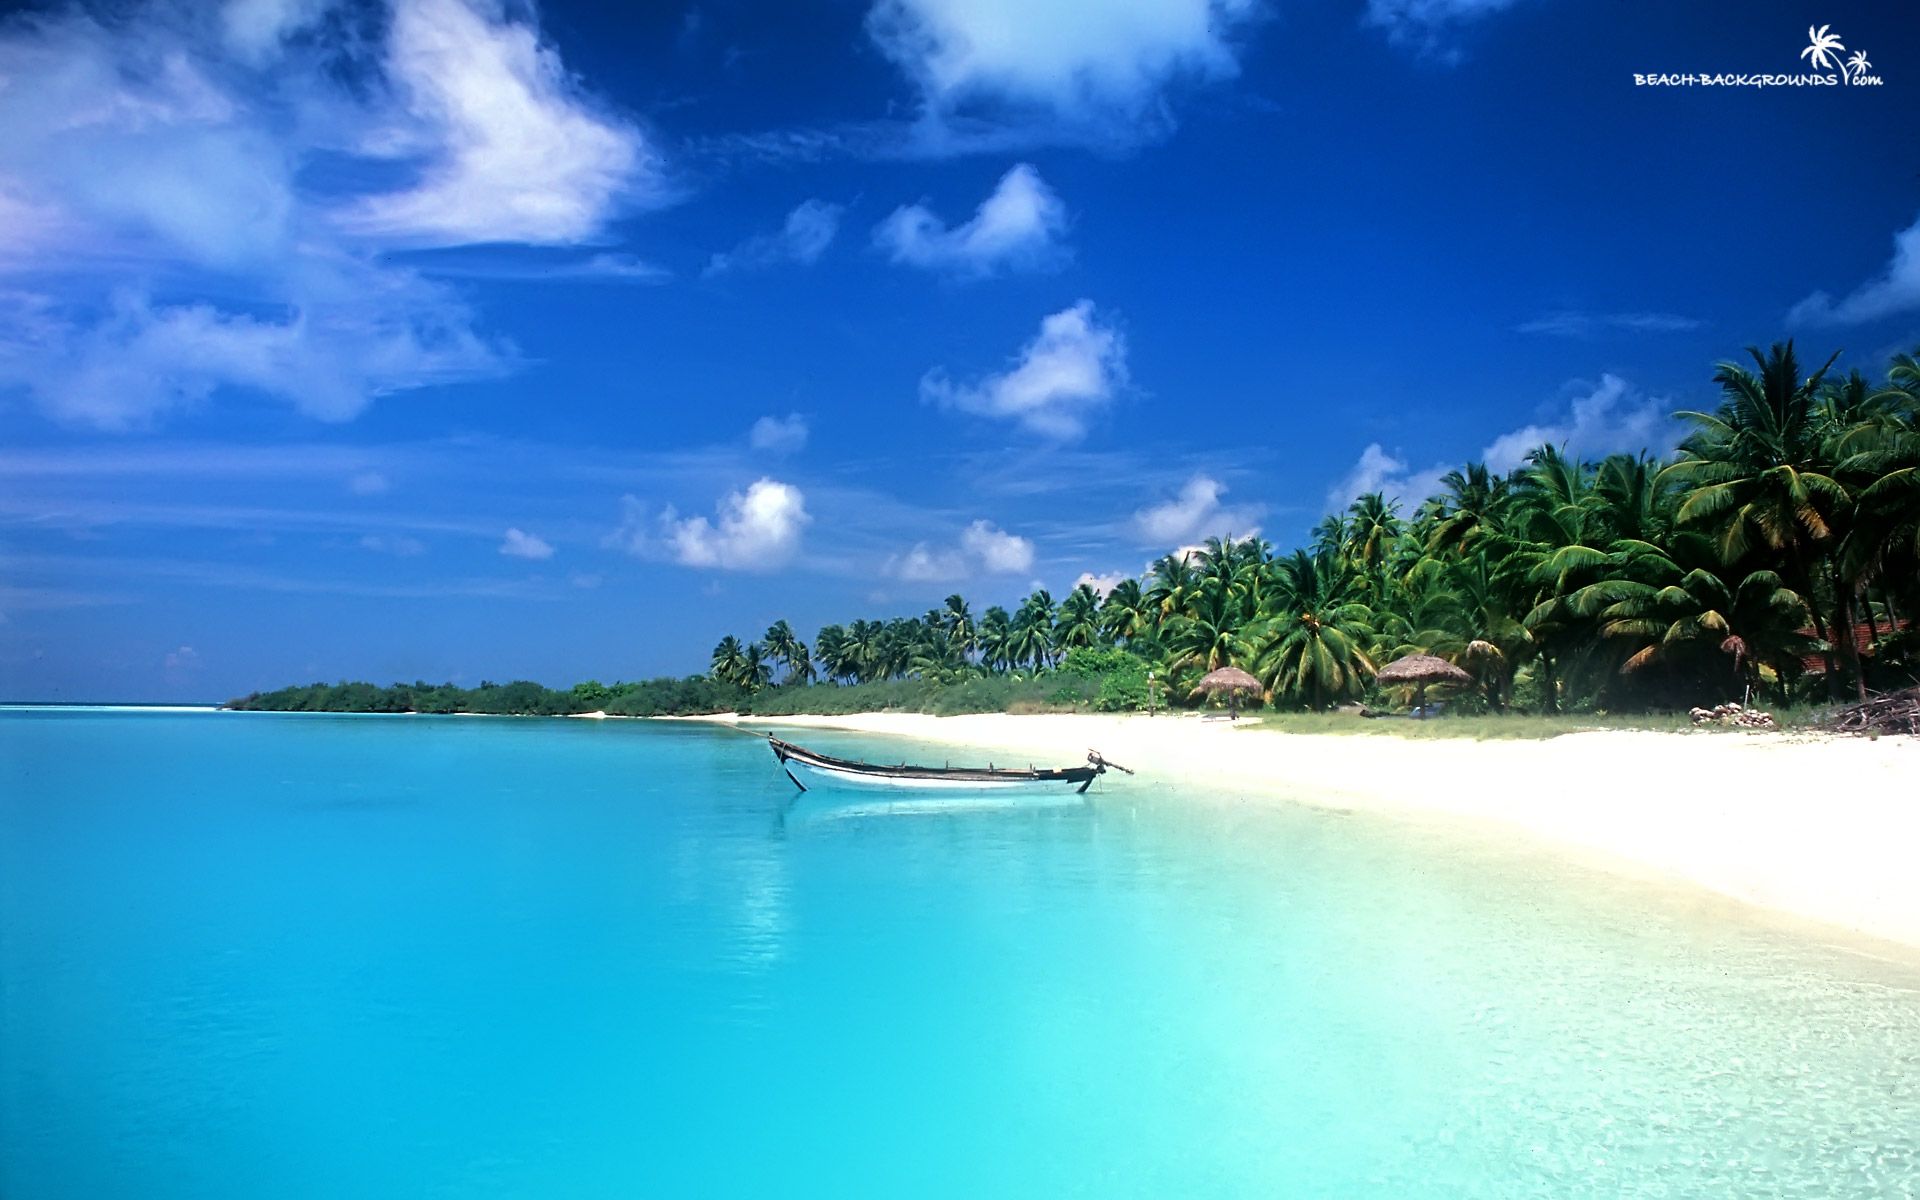 Beautiful Beaches In The World Wallpaper Background HD